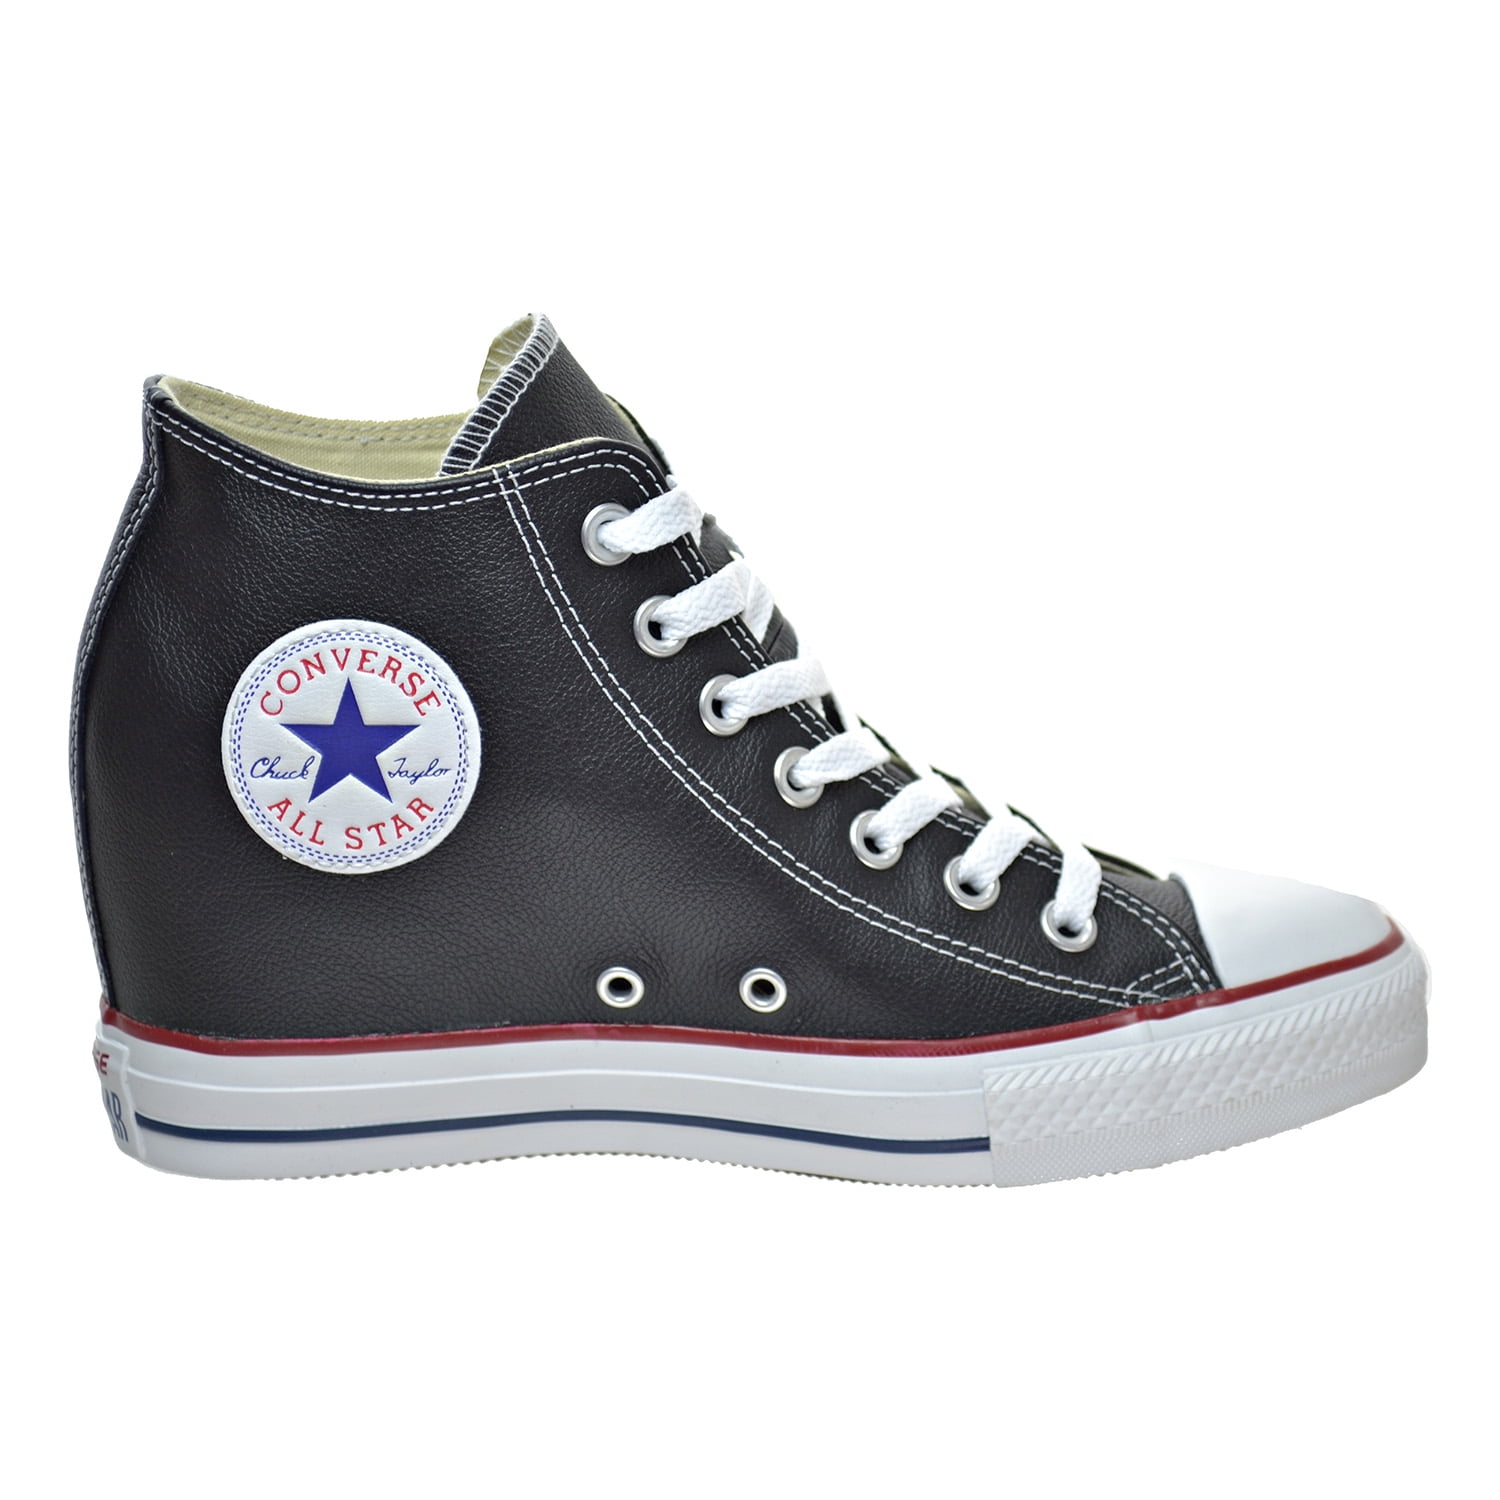 Converse - Converse Chuck Taylor Wedge Lux Mid Women's ...